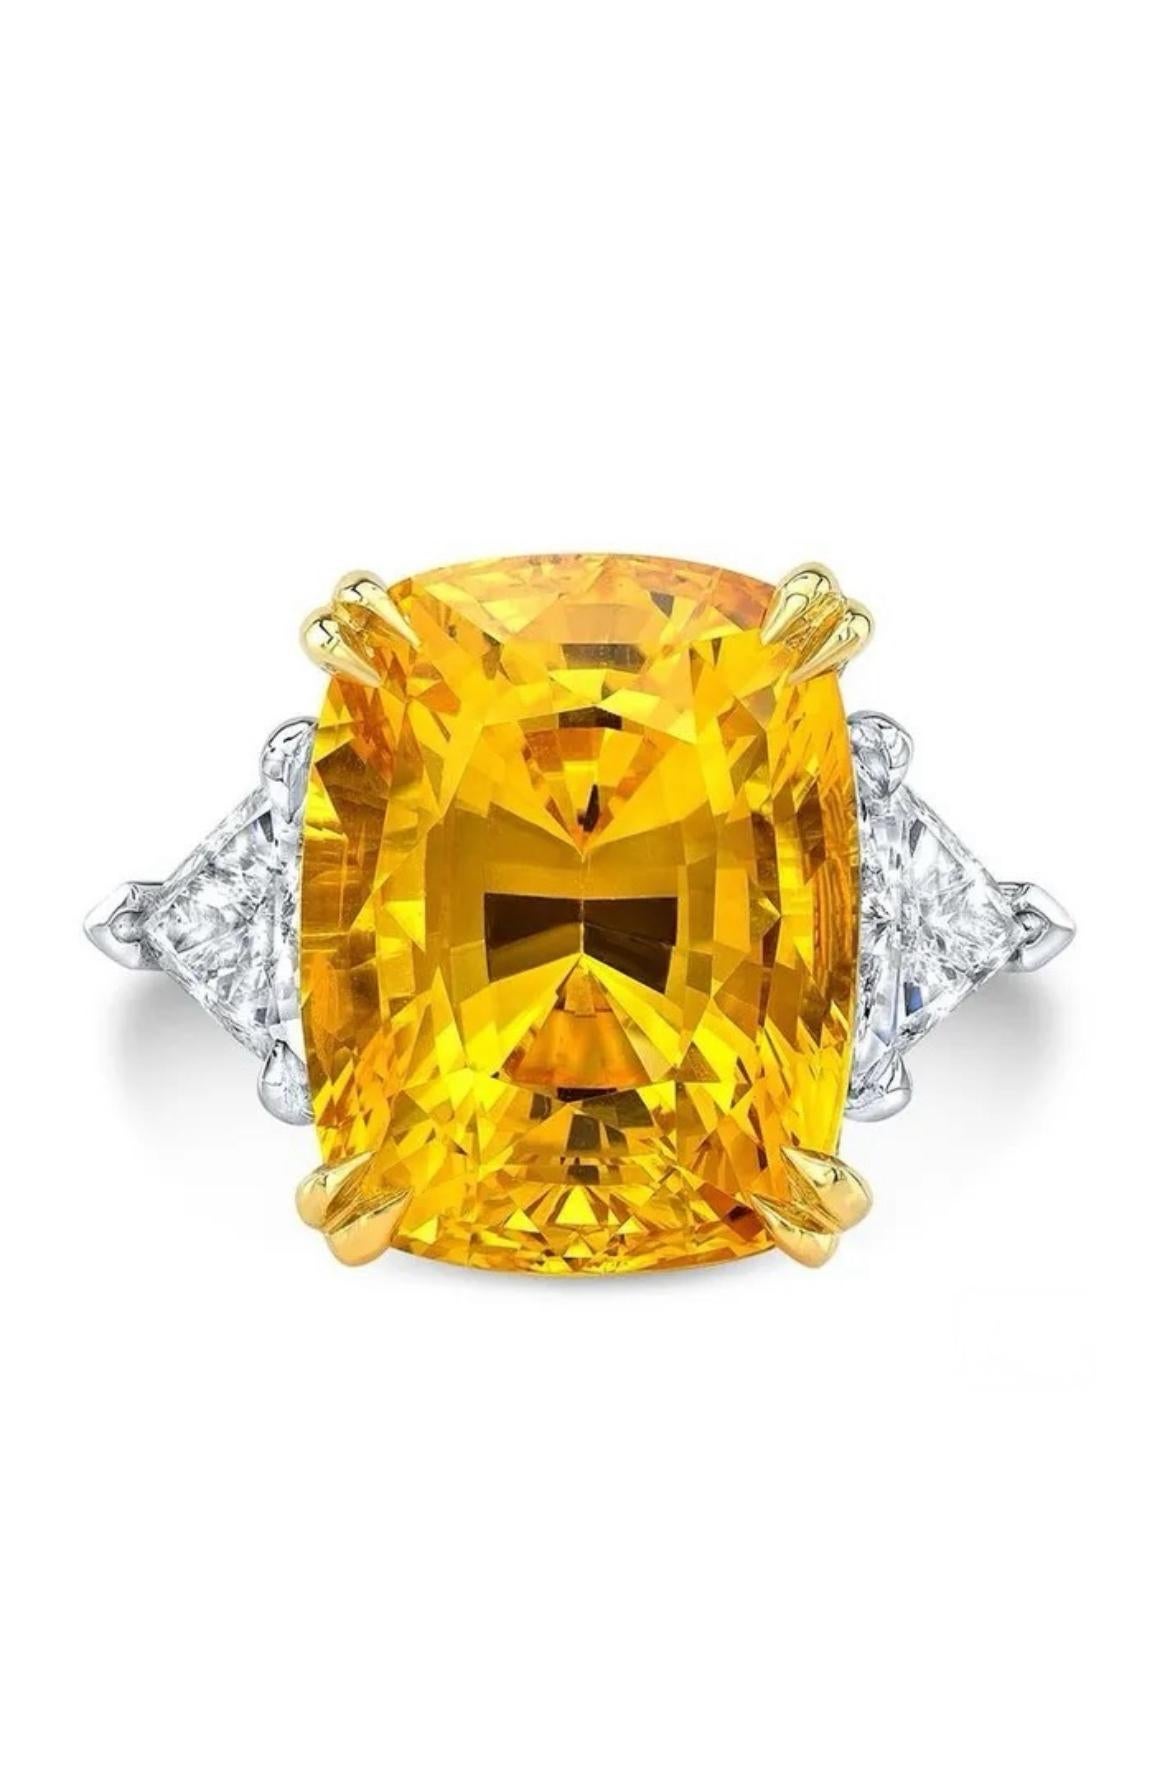 Modern 15.83ct GIA certified, yellow sapphire ring in platinum with 18K yellow gold. For Sale